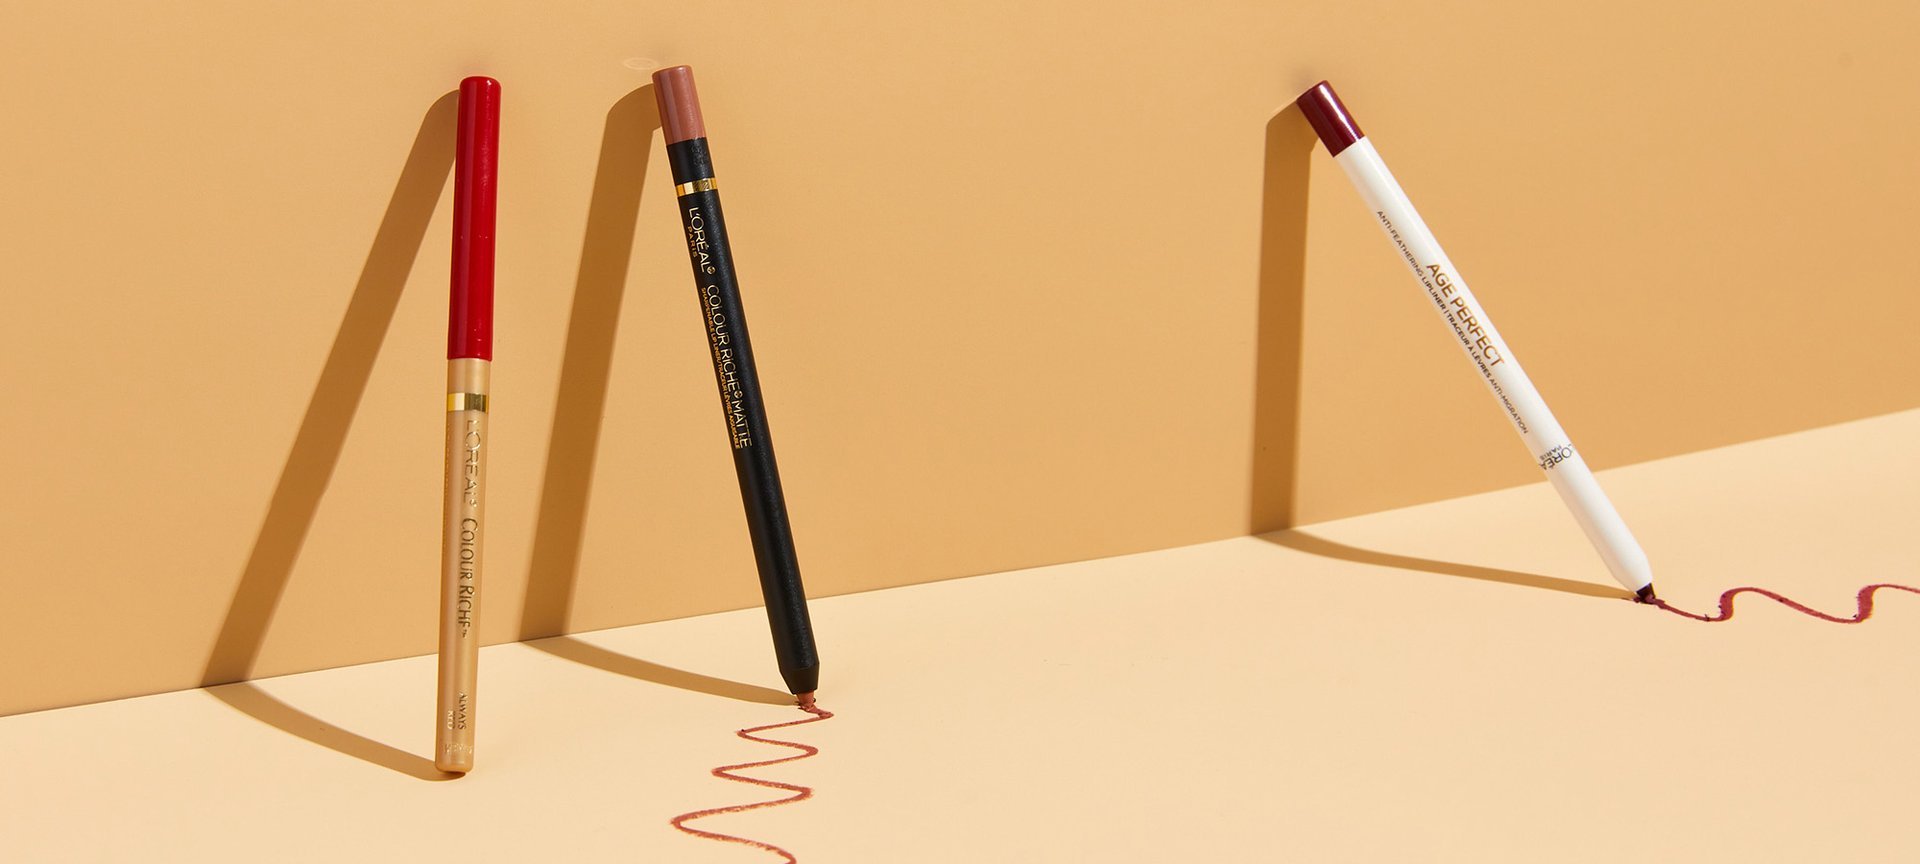 Best lip liners 2022: Pencil and retractable liners for a smudge-free pout